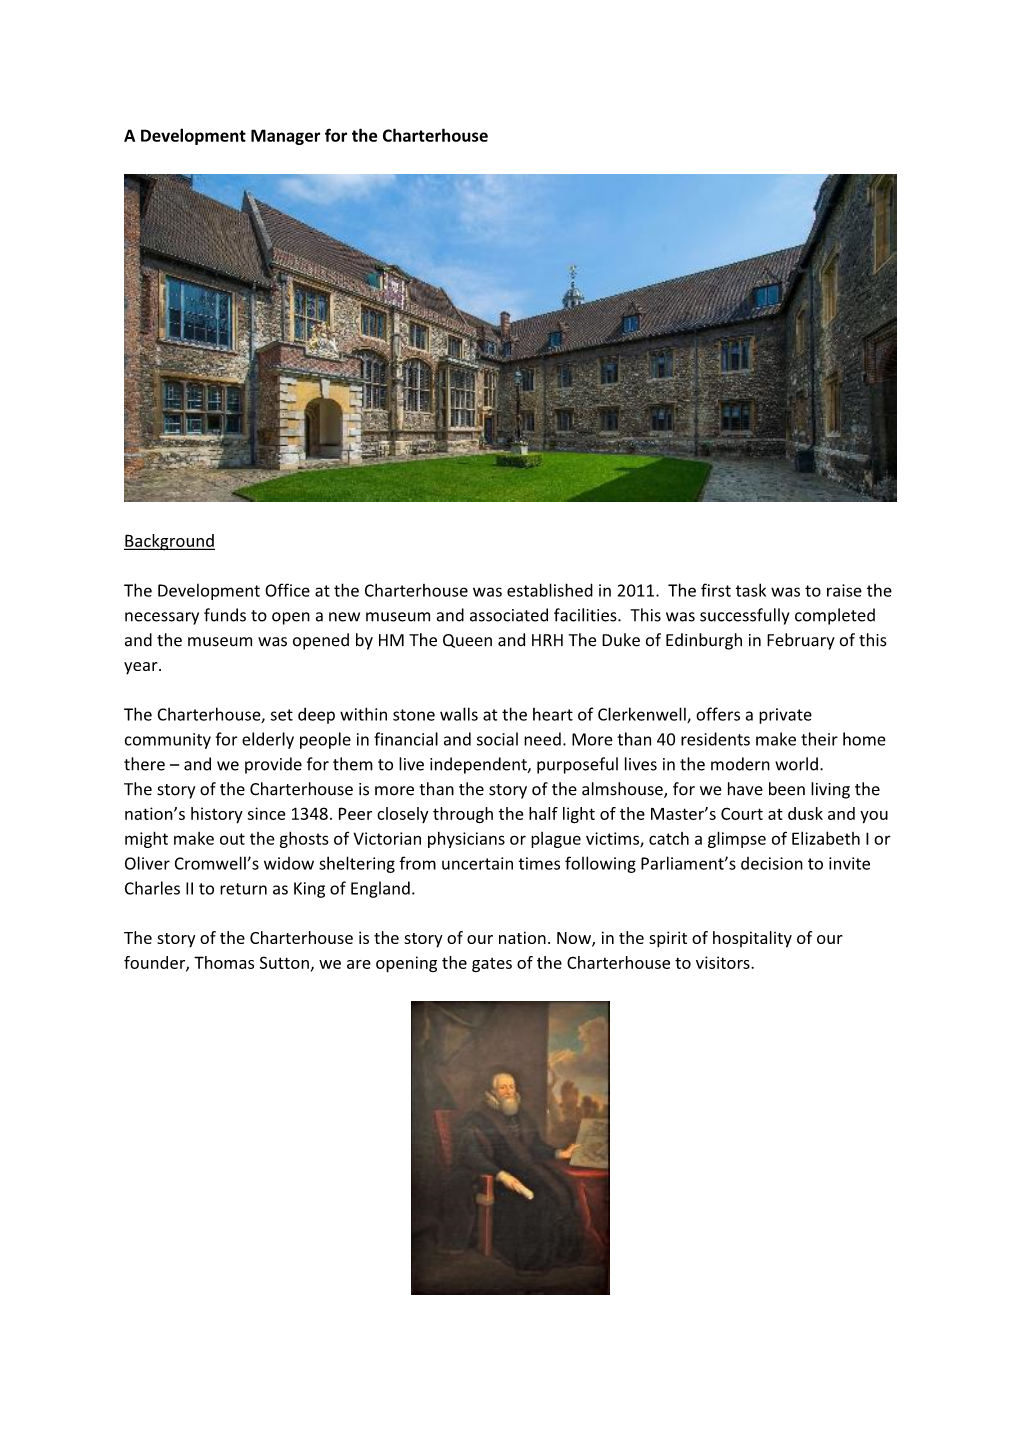 A Development Manager for the Charterhouse Background The